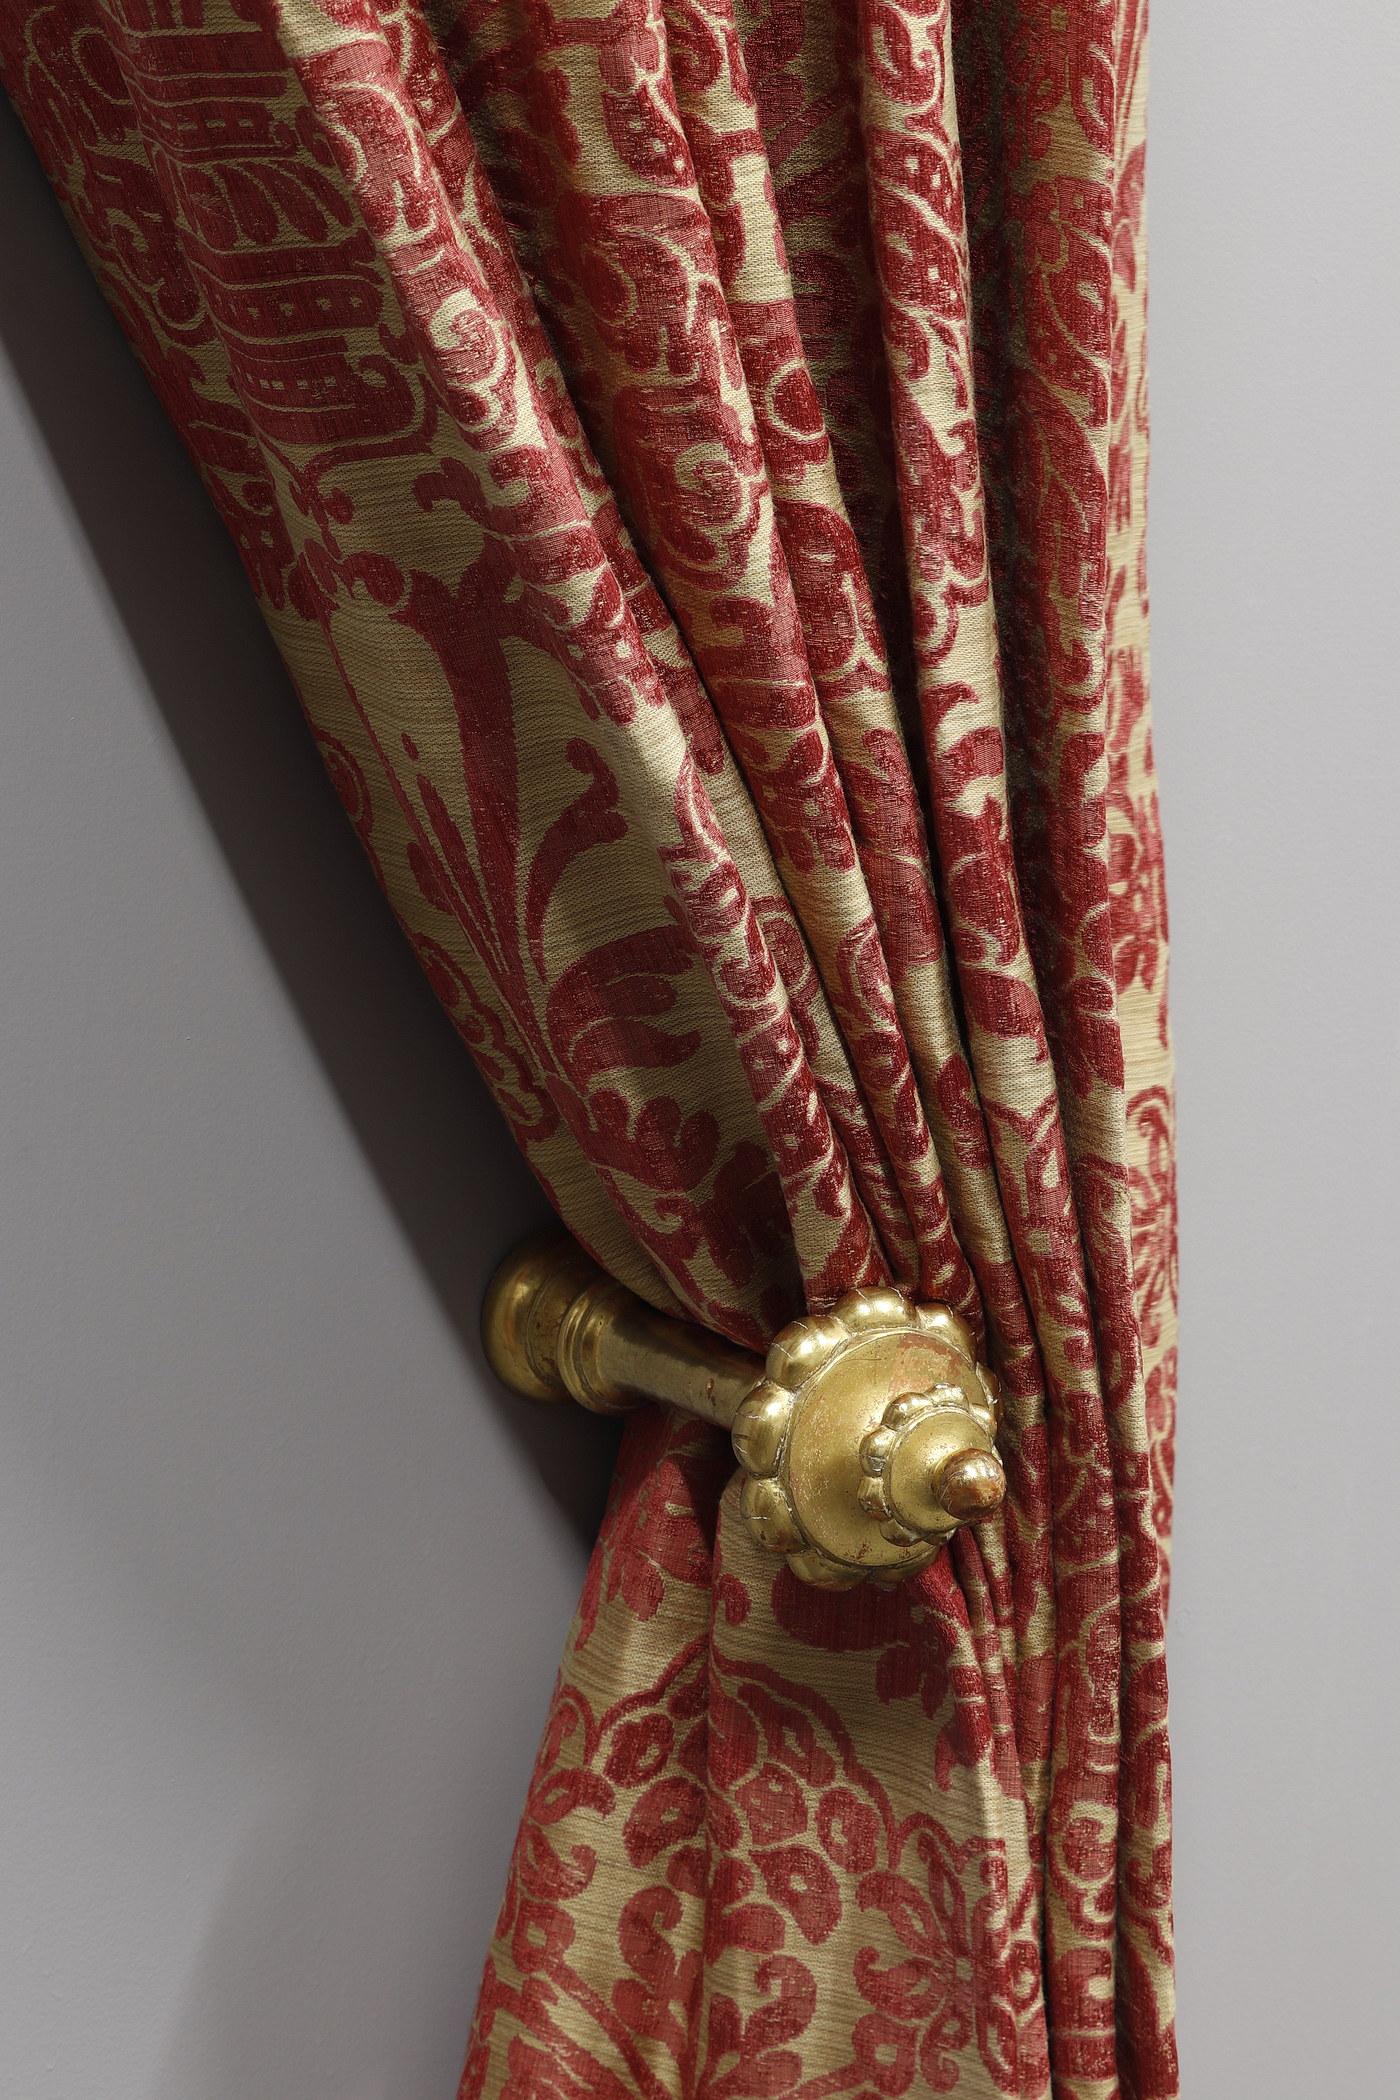 Two Pairs of Fadini-Borghi Curtains and Their Valances Topped by a Gilded Wood 8